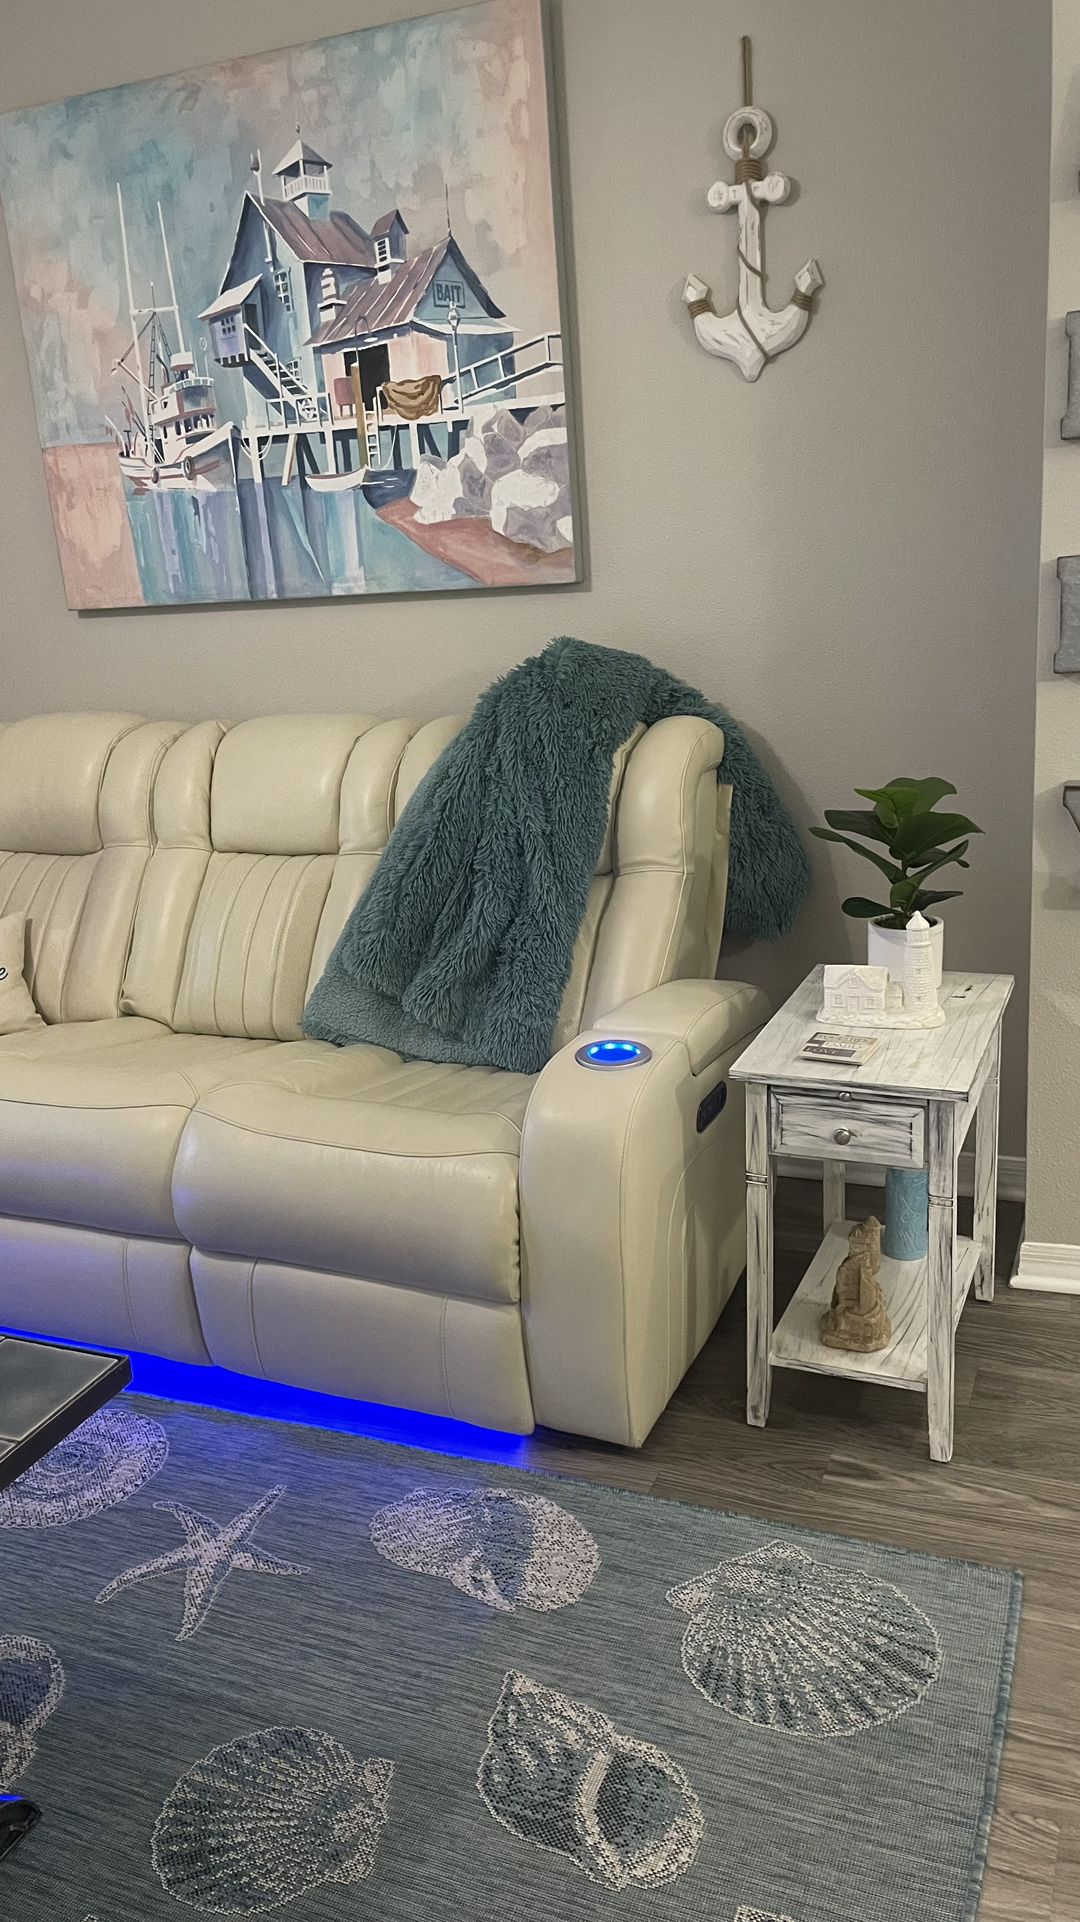 Ivory, White Real Leather Couch, And Loveseat With Electric Recliners, Dual On Both The Couch And Loveseat With Phone, Chargers, And in light lighting